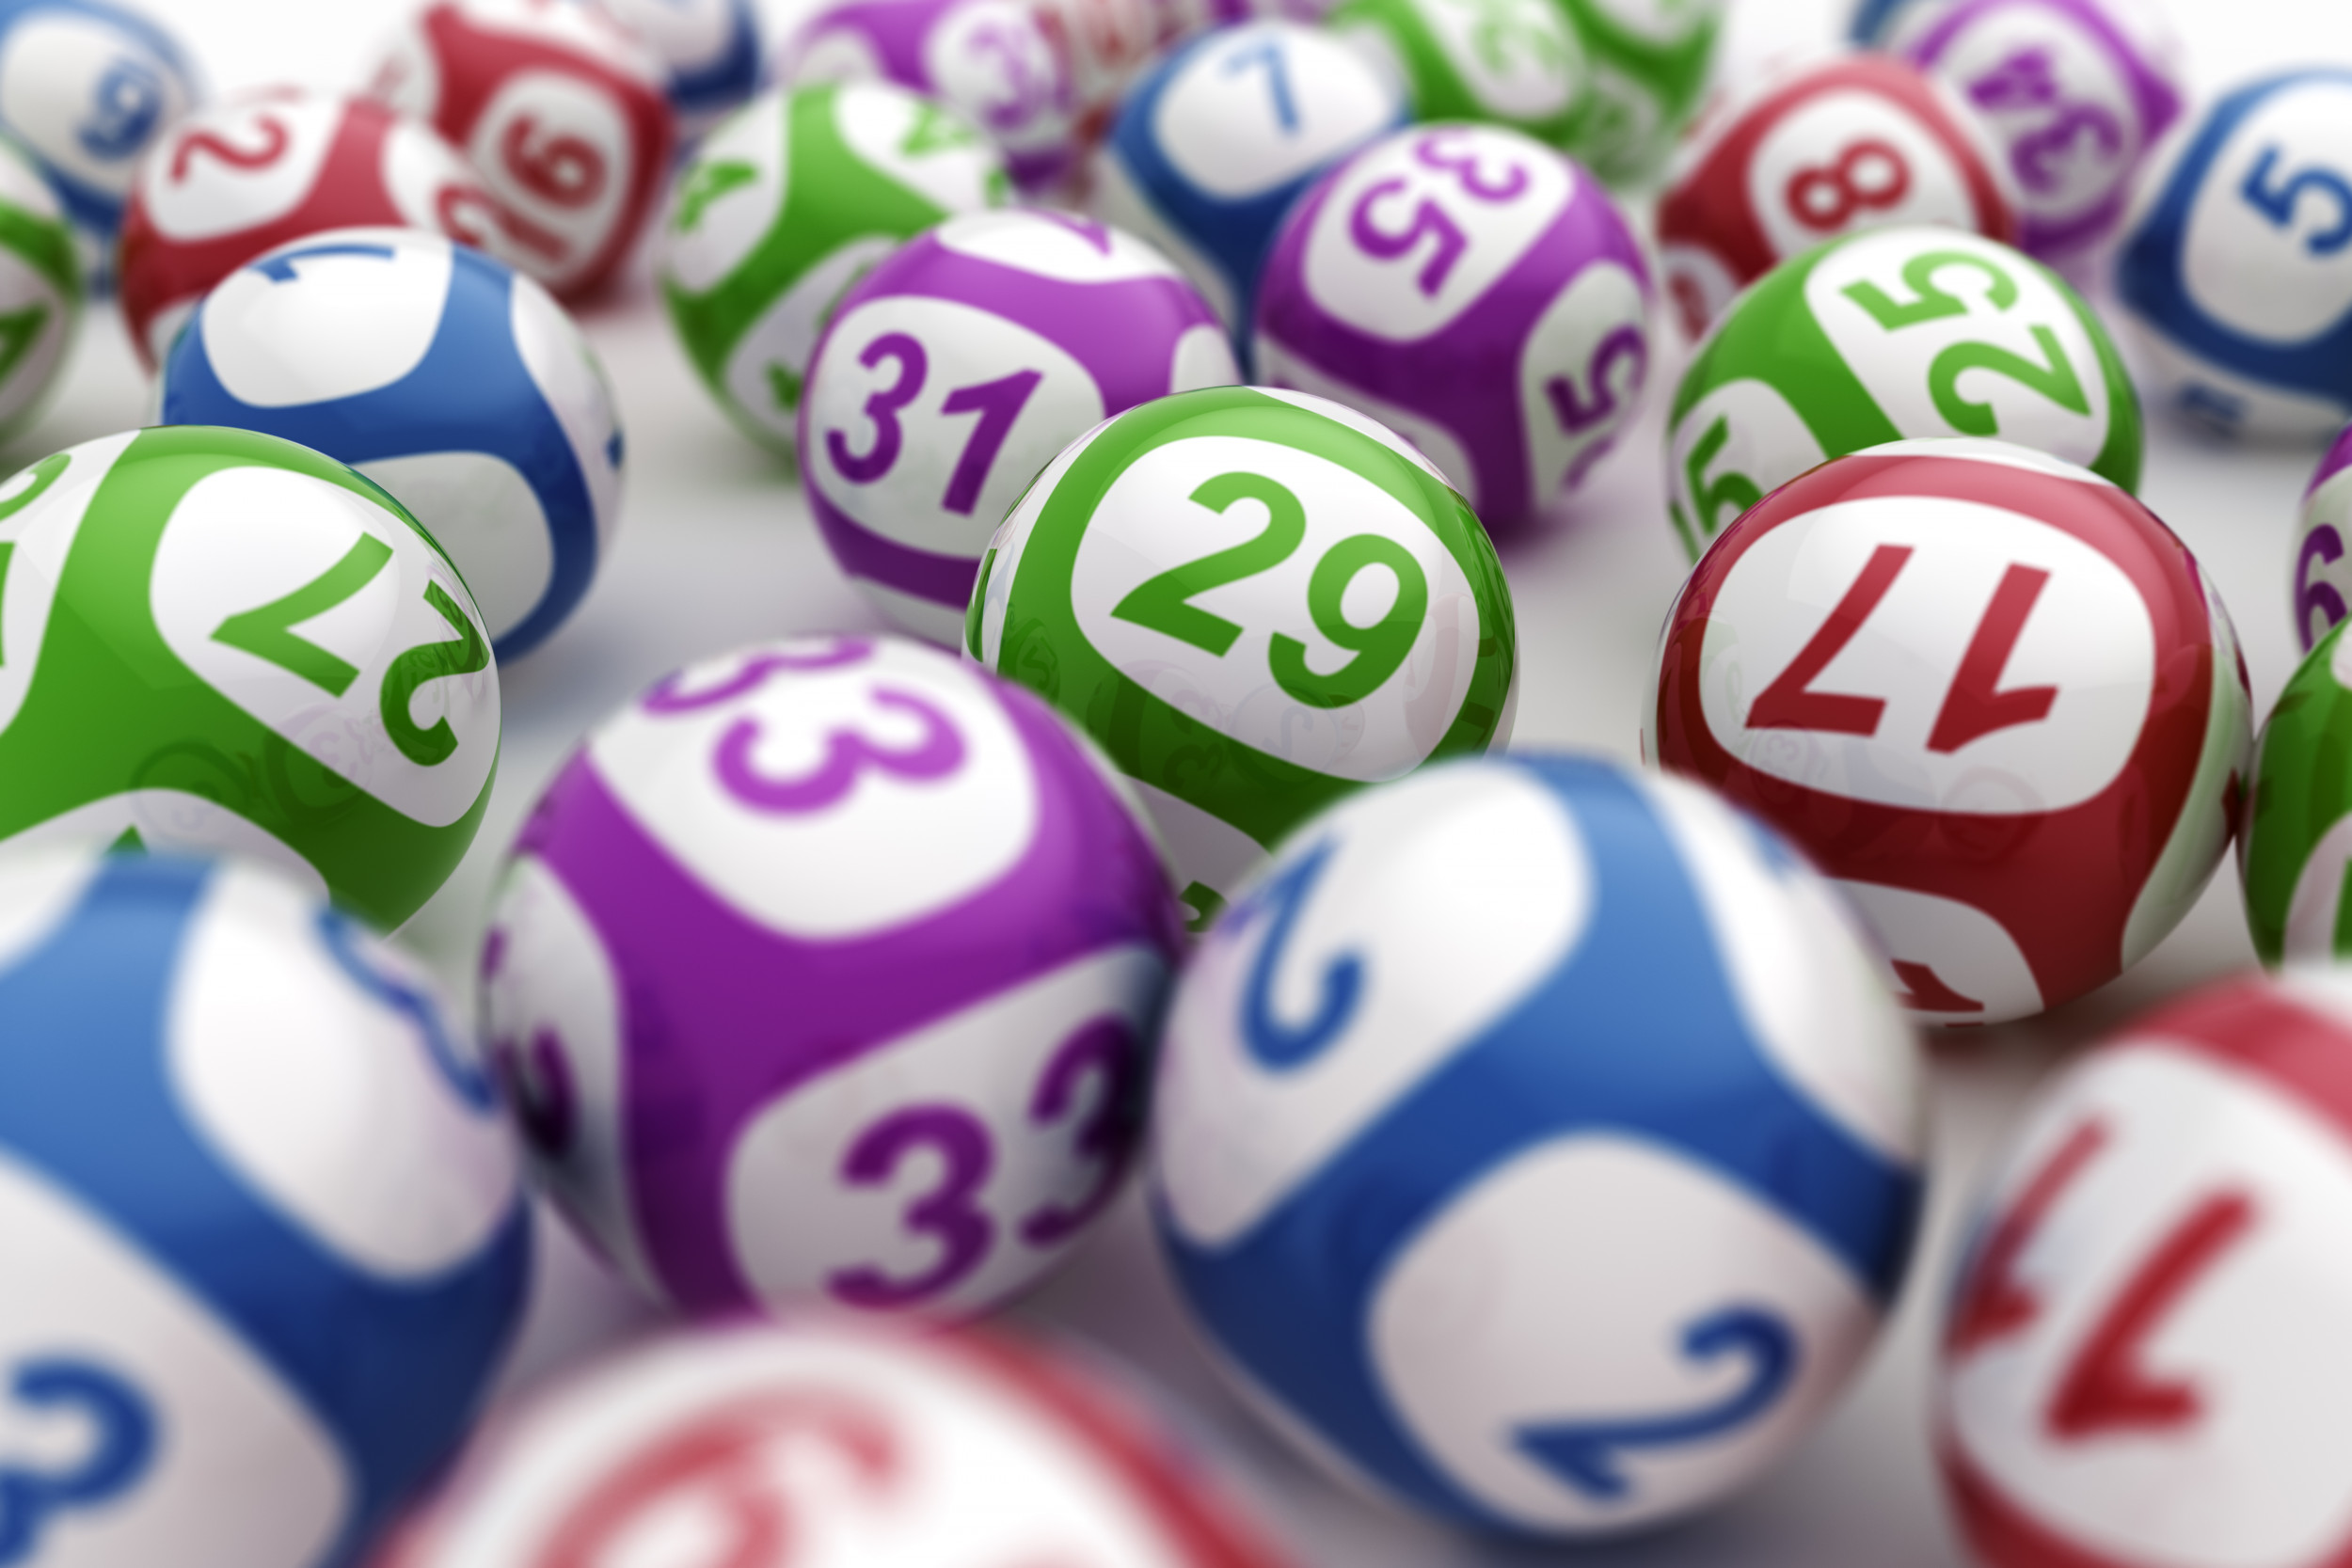 the lotto numbers for wednesday